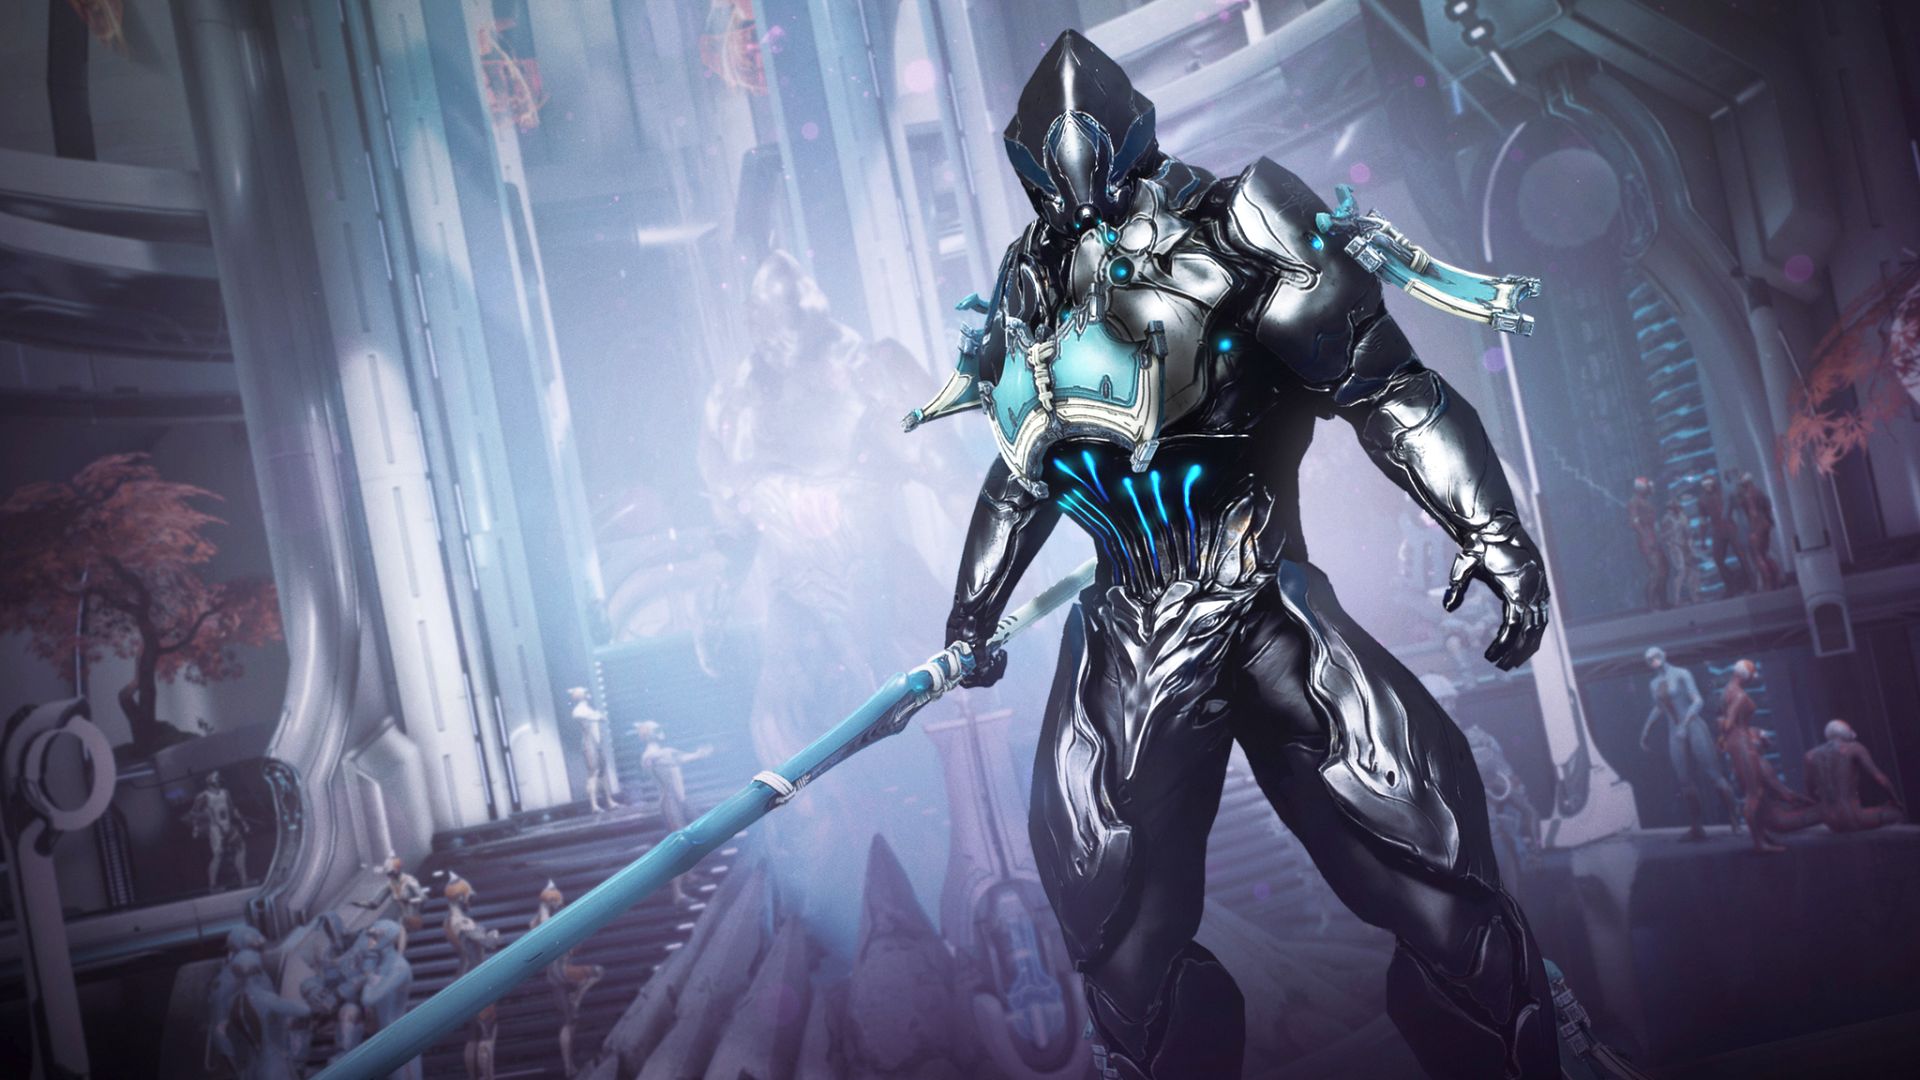 TennoCon 2021 will have an “interactive preview” of Warframe expansion